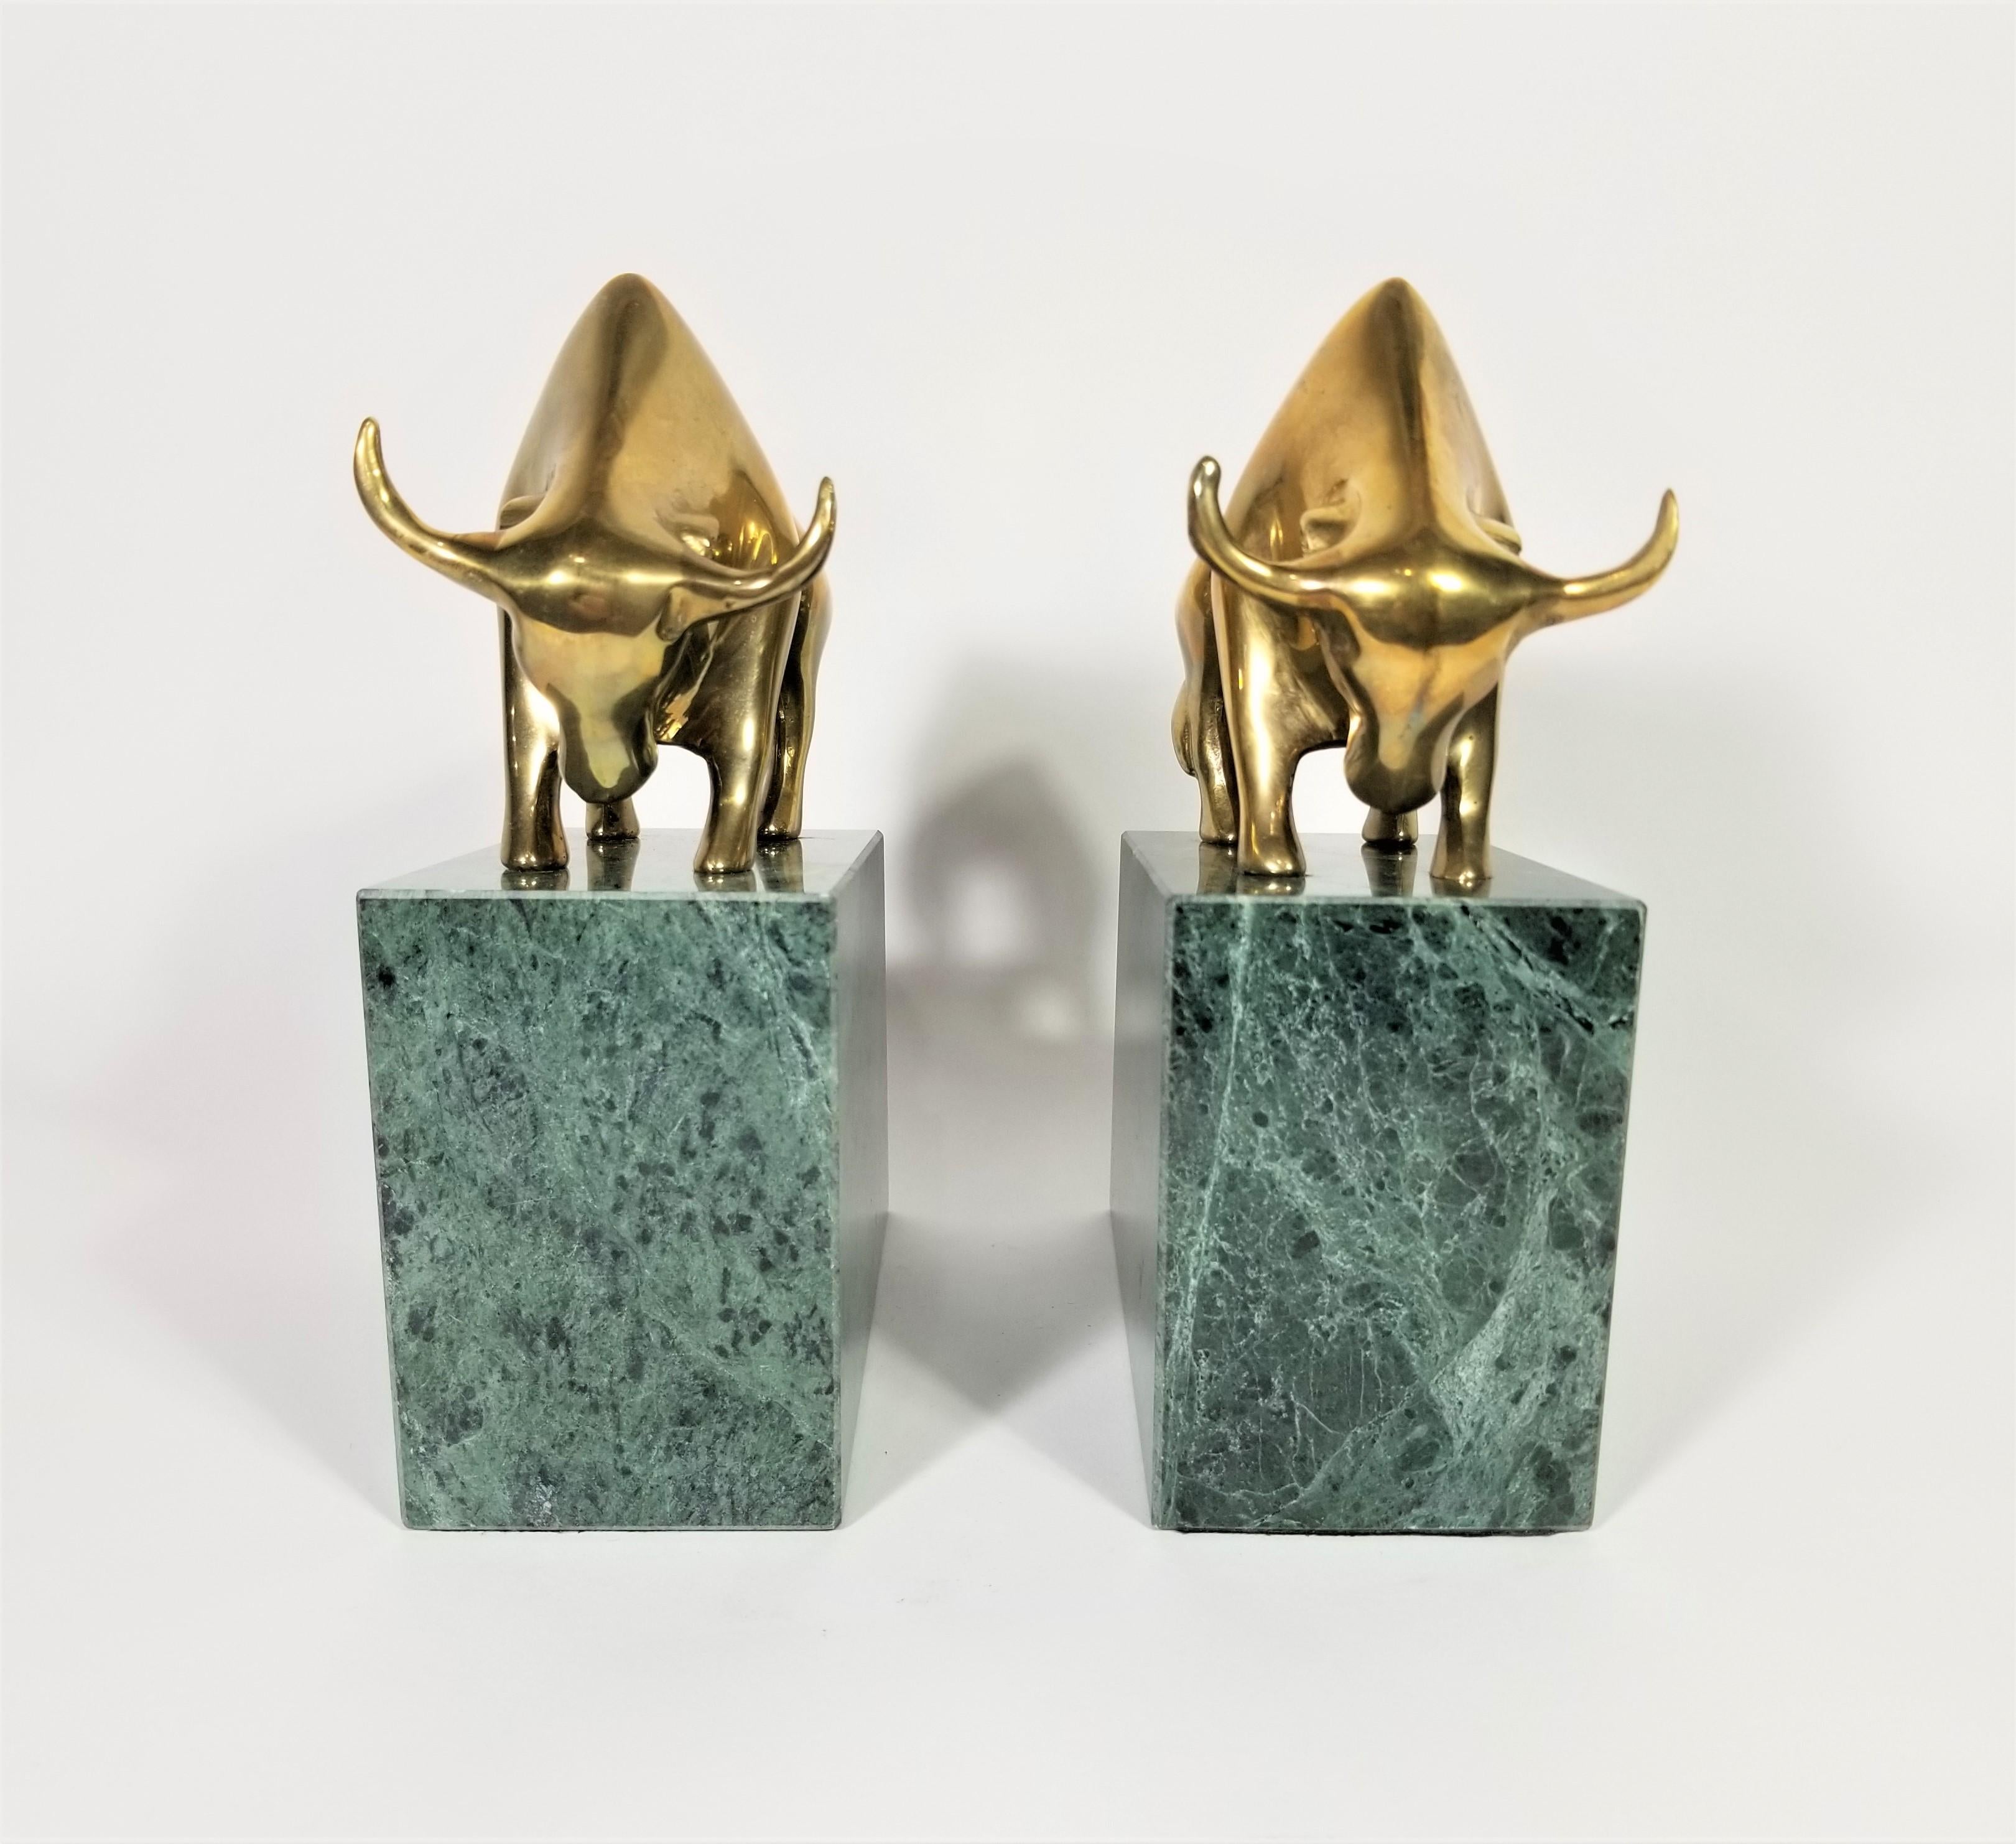 Pair of 1980s Wall Street Bookends. Solid Brass Bulls supported by Solid Green Marble Base. Heavy Substantial weight. Excellent Condition. 